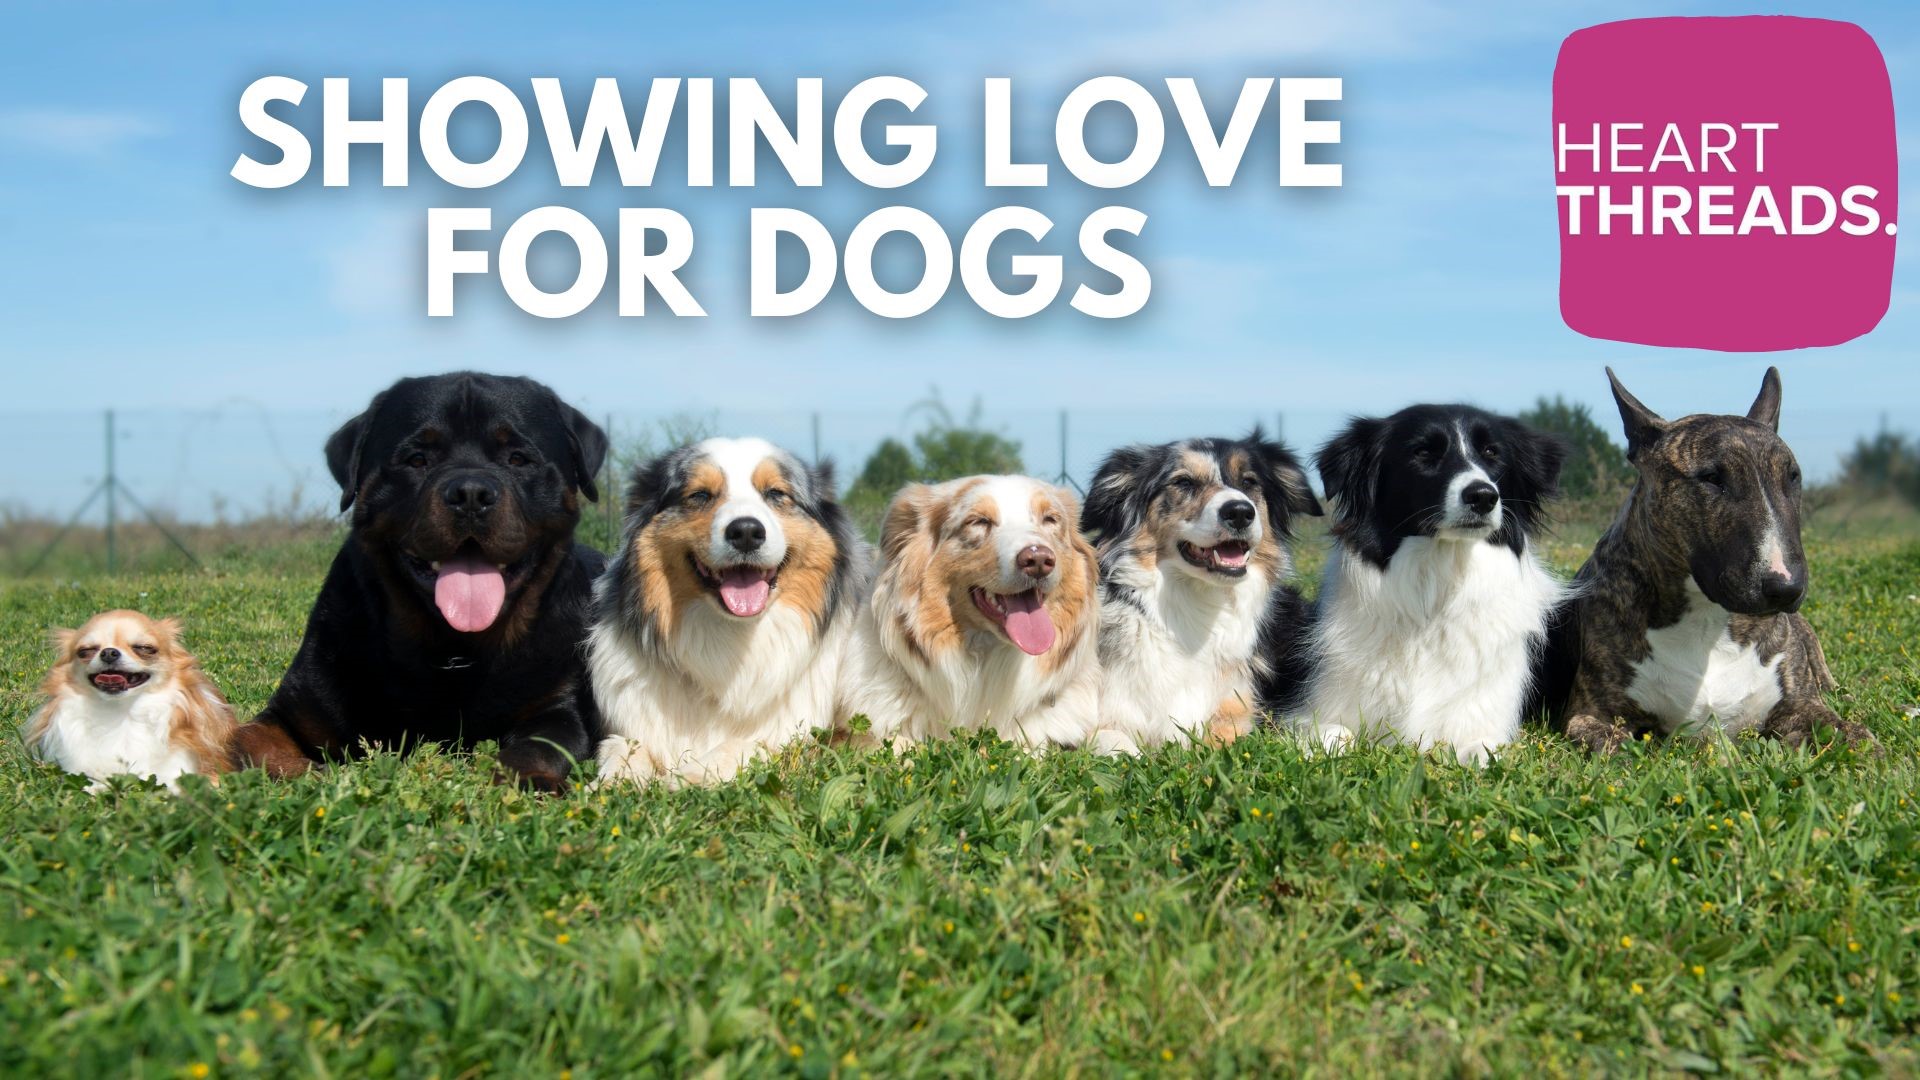 Heartwarming stories of dogs and how they are helpful companions for many. In this special we show our appreciation for all dogs out there making days brighter.